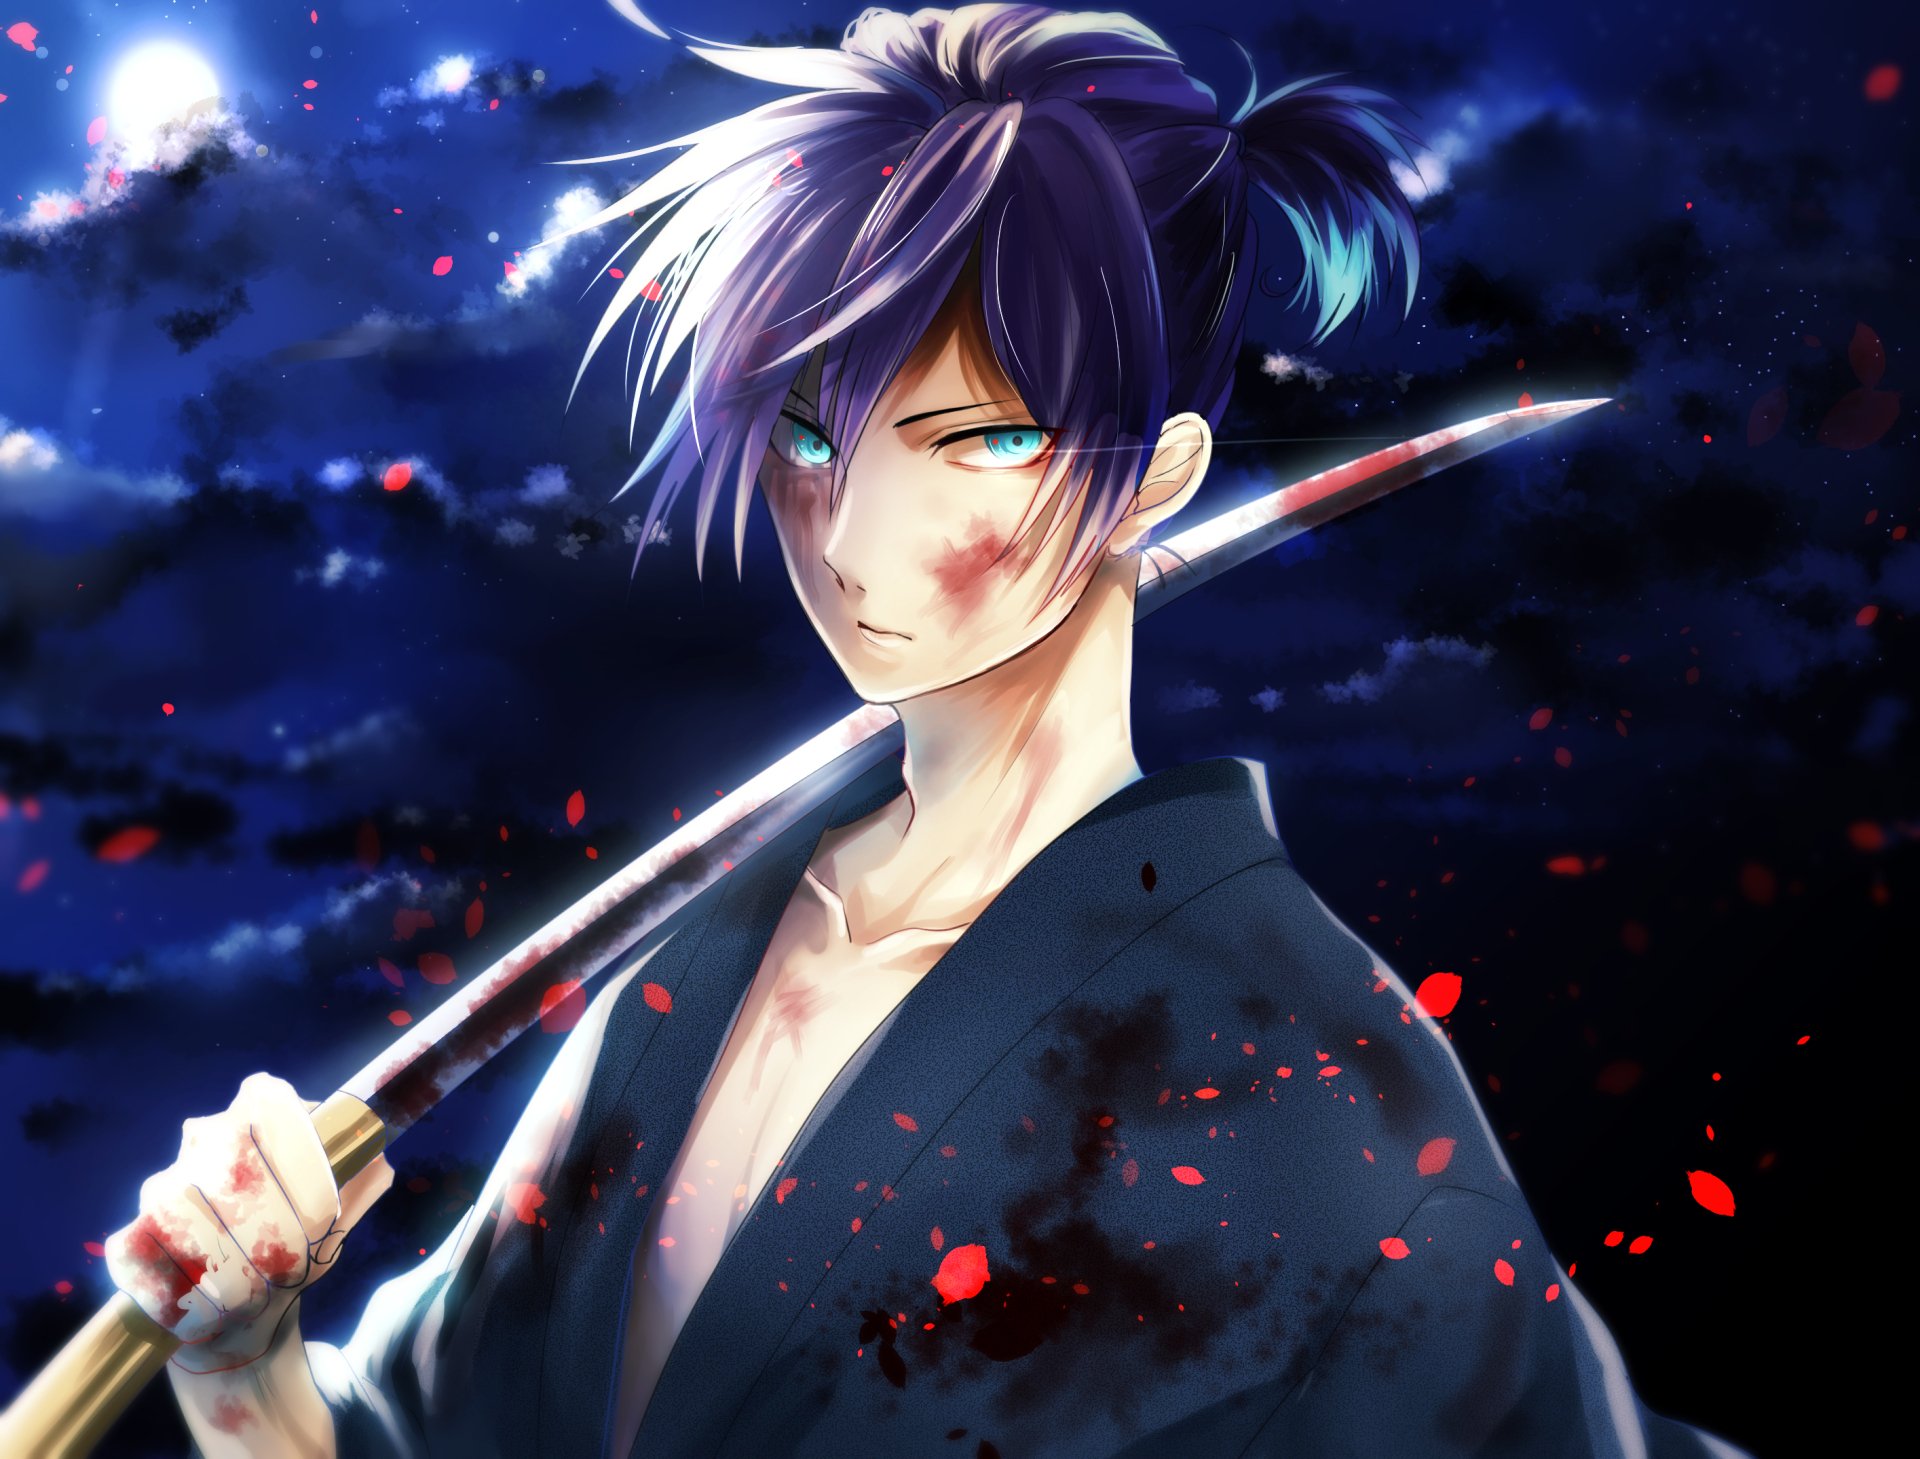 4. Yato from Noragami - wide 11